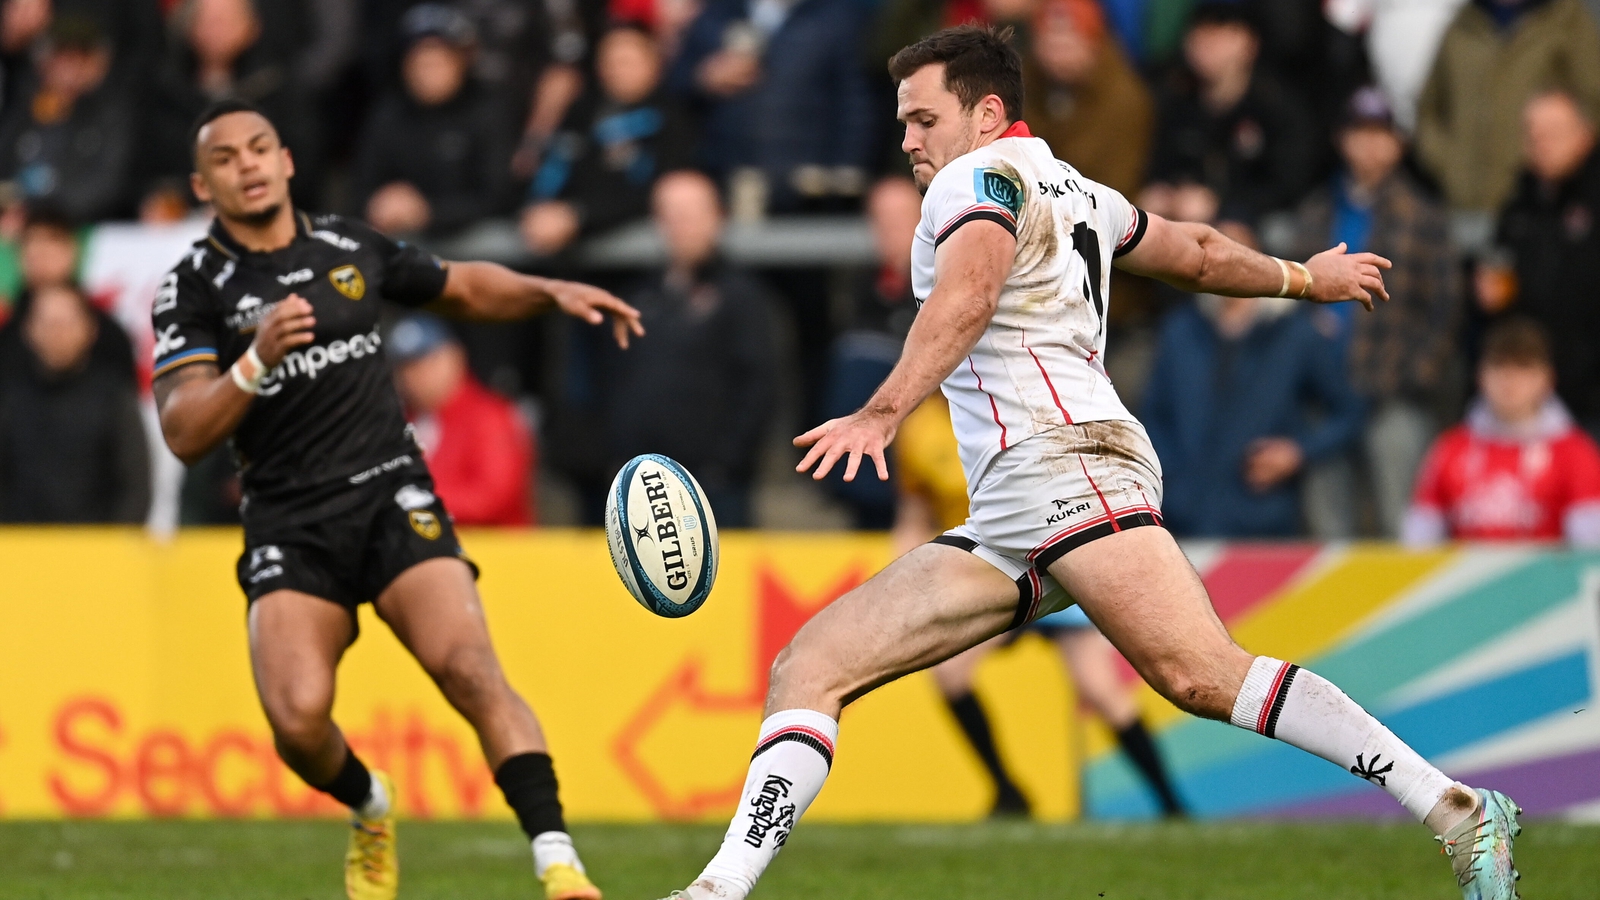 United Rugby Championship Ulster 40-19 Dragons